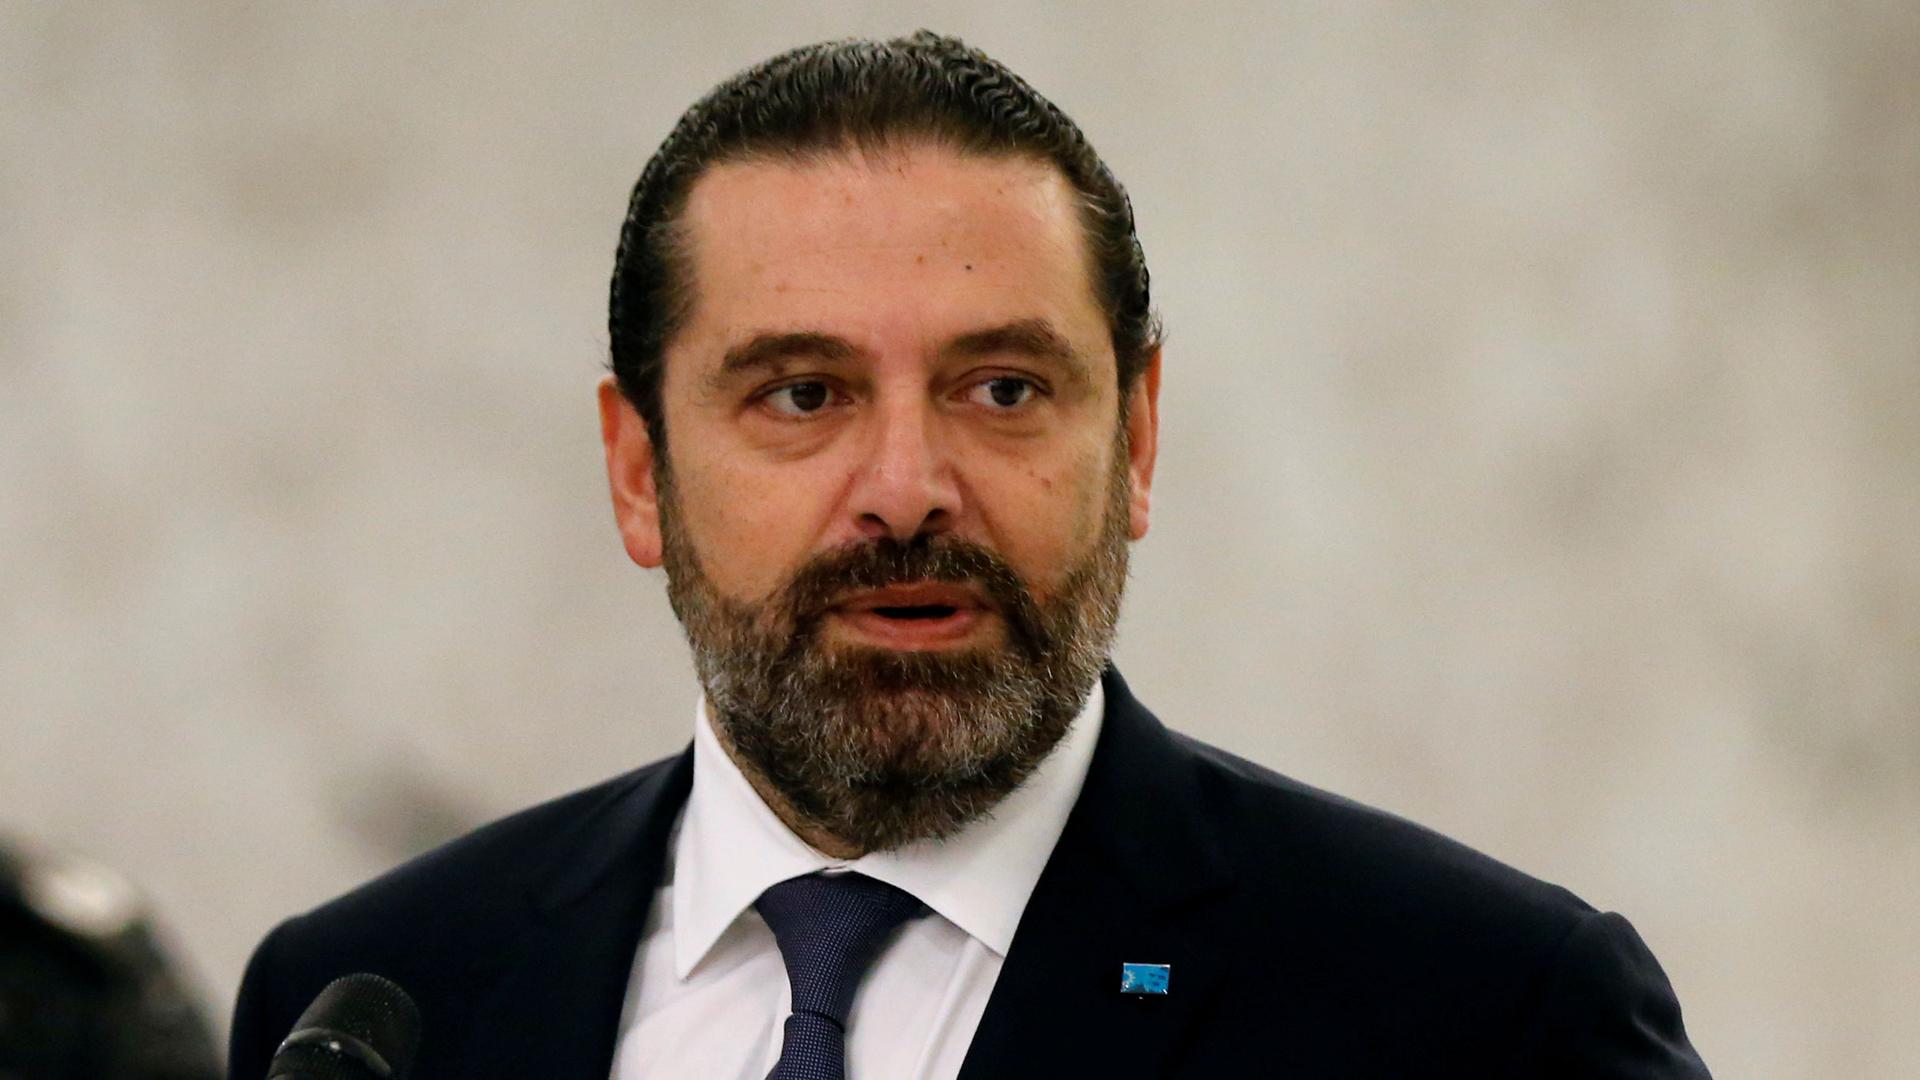 Lebanon's caretaker Prime Minister Saad al-Hariri is shown in a close-up photo standing behind a microphone and wearing a dark suit.